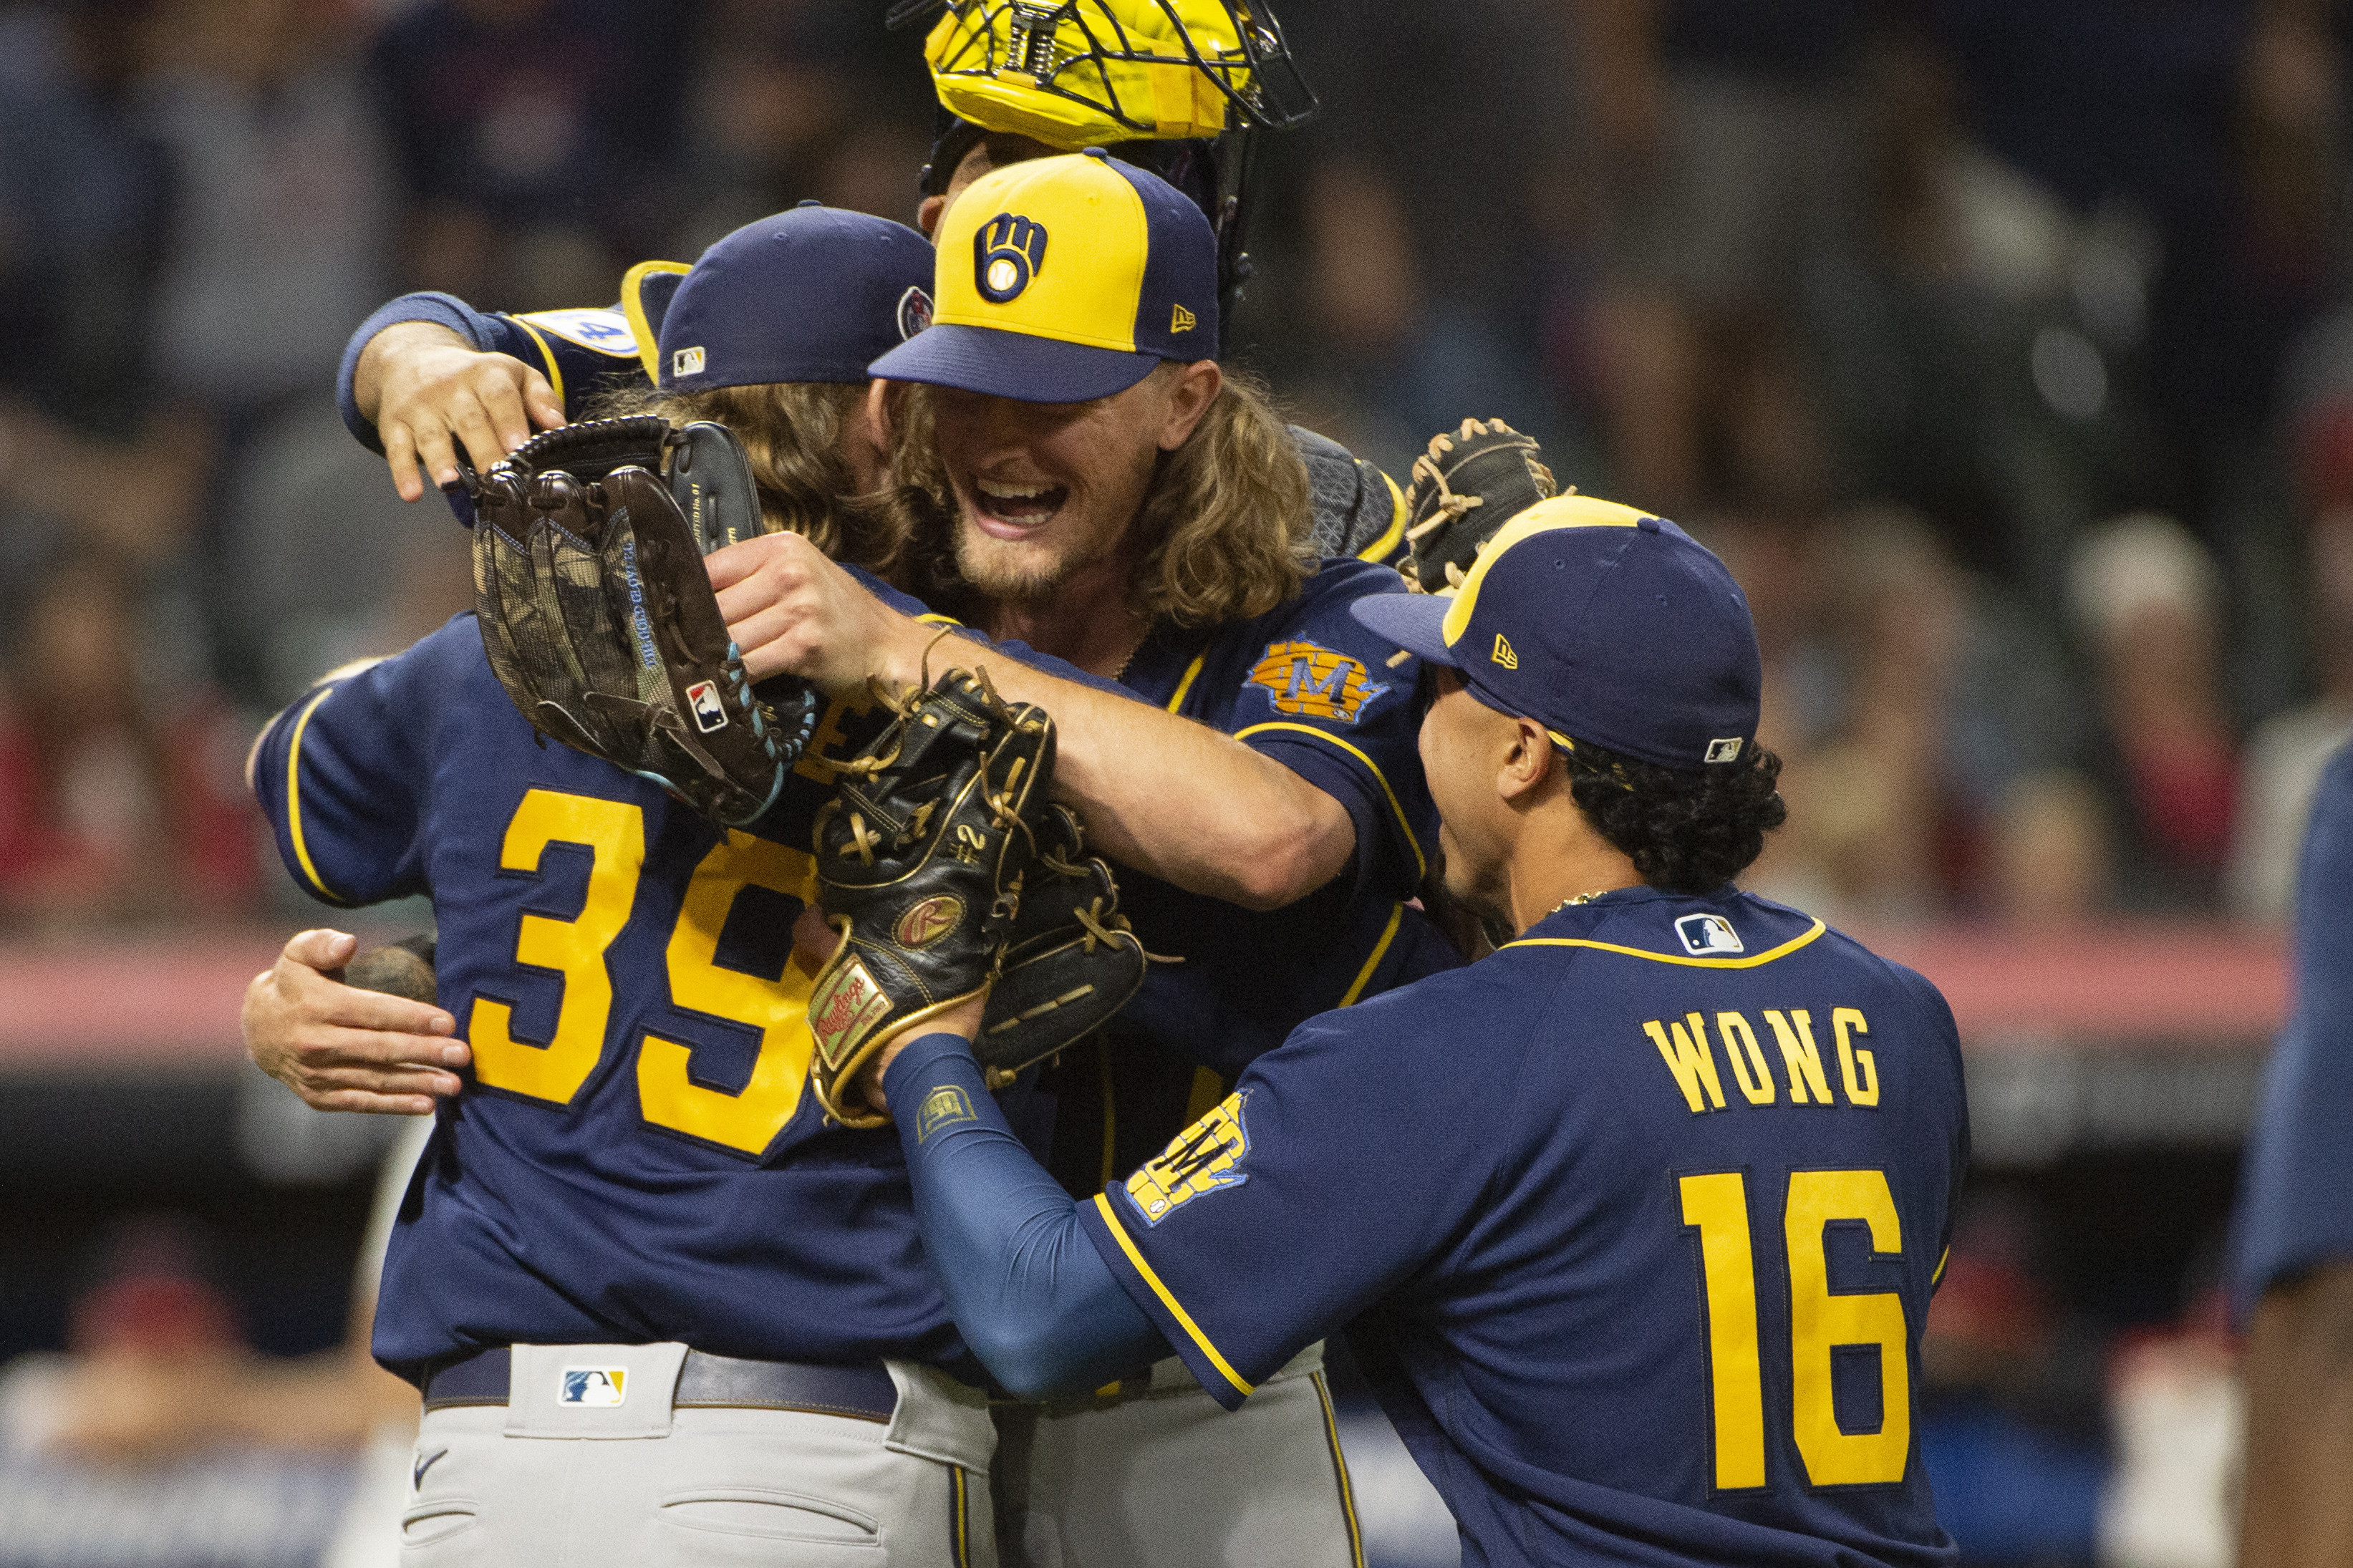 Brewers clinch playoff spot, close in on NL Central title with 12